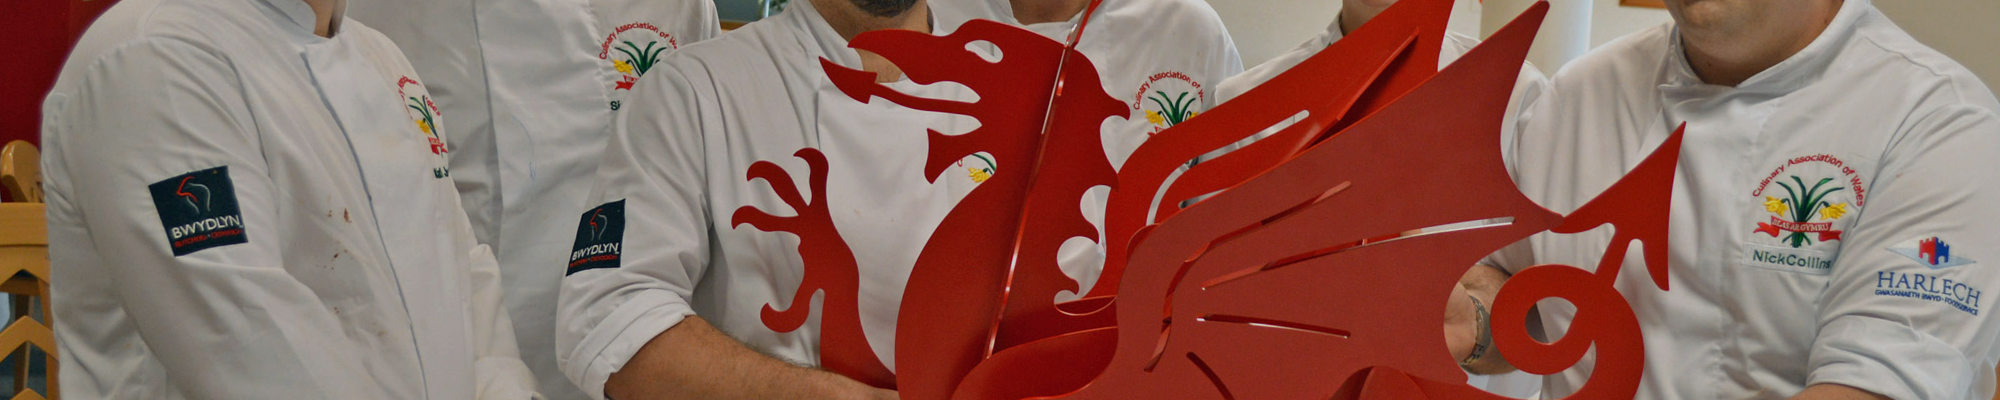 national chef of wales culinary association of wales